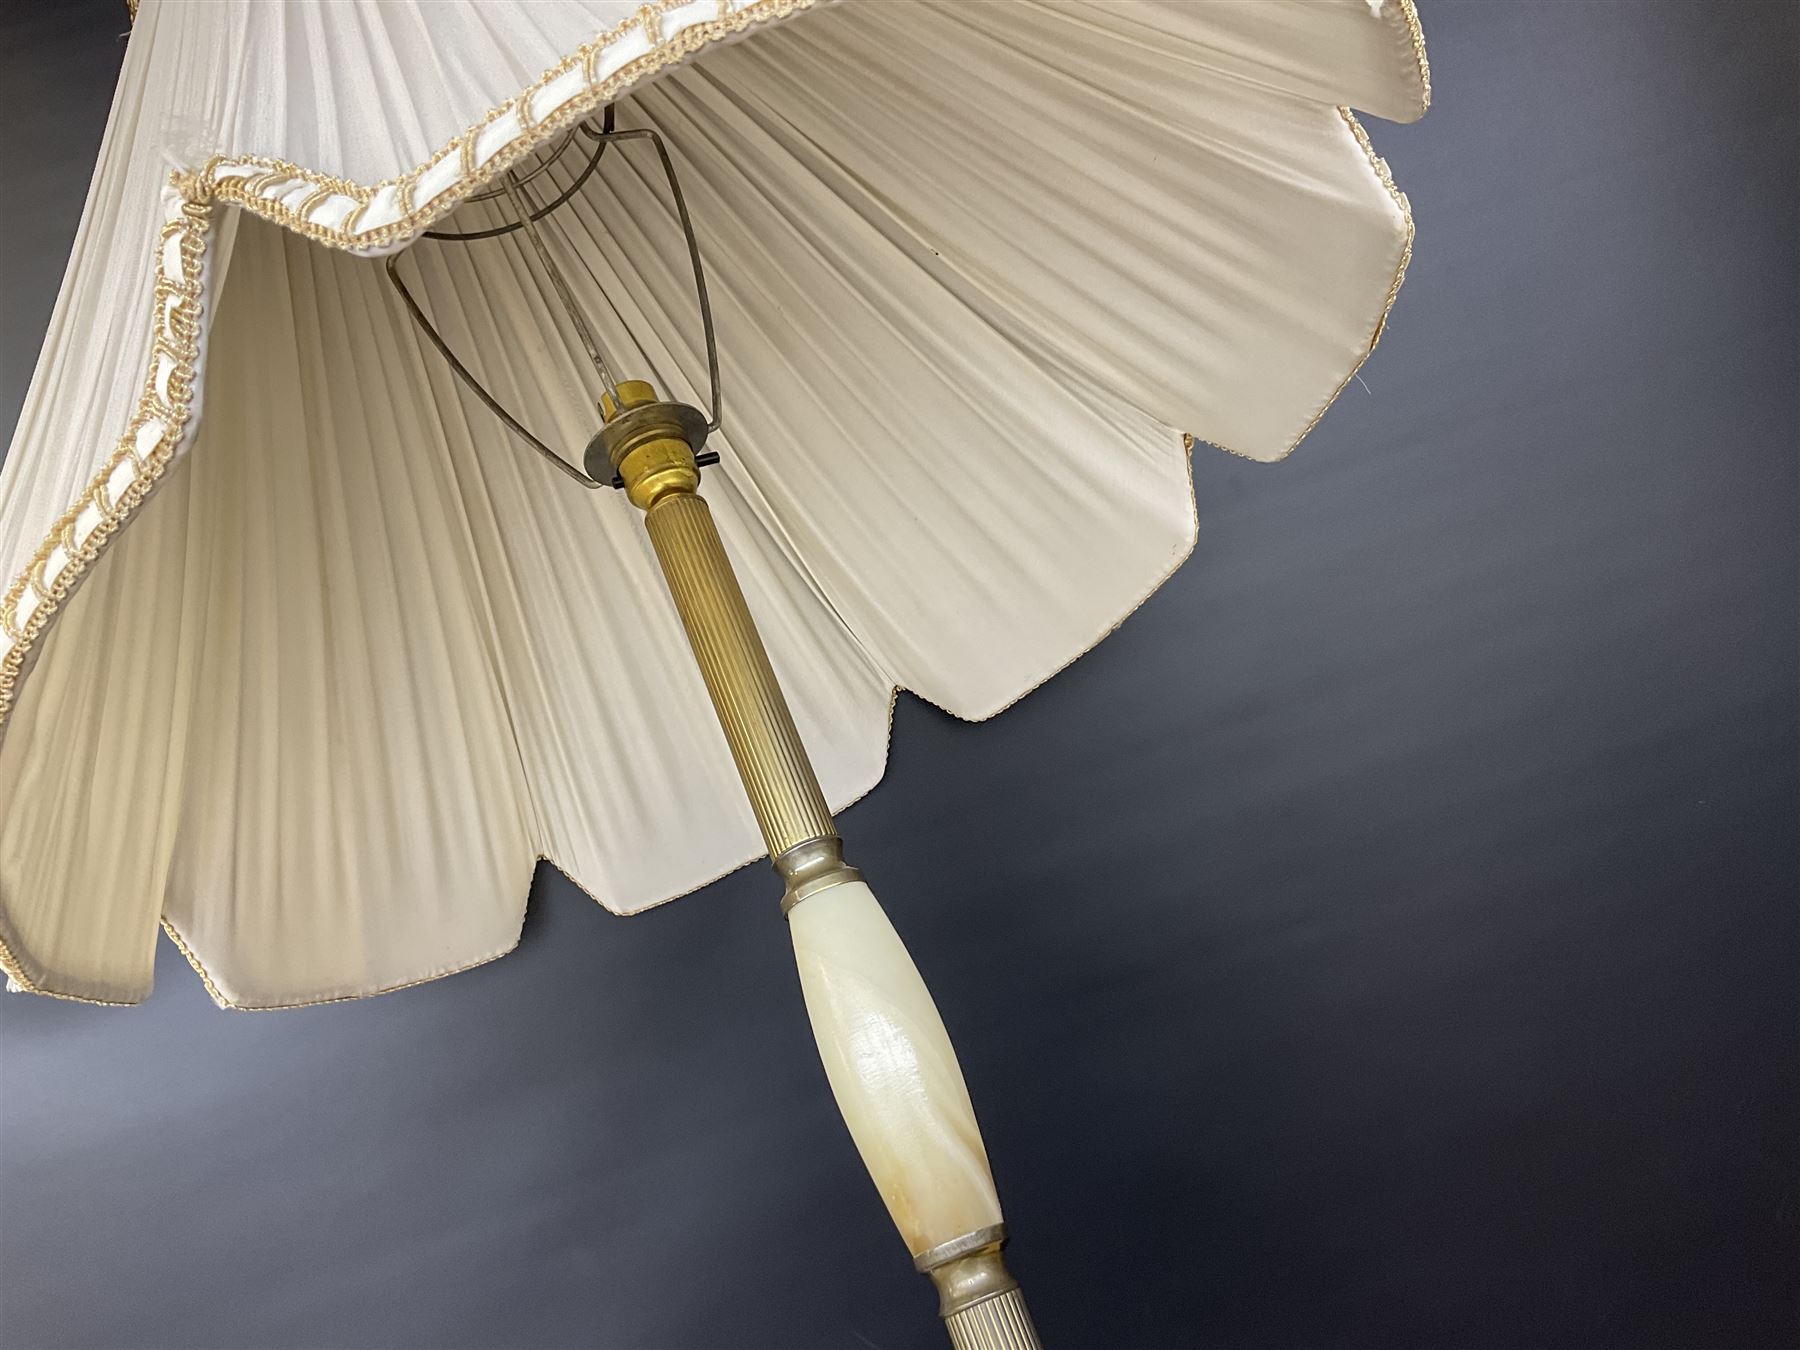 Floor lamp with brass and onyx central column - Image 3 of 9